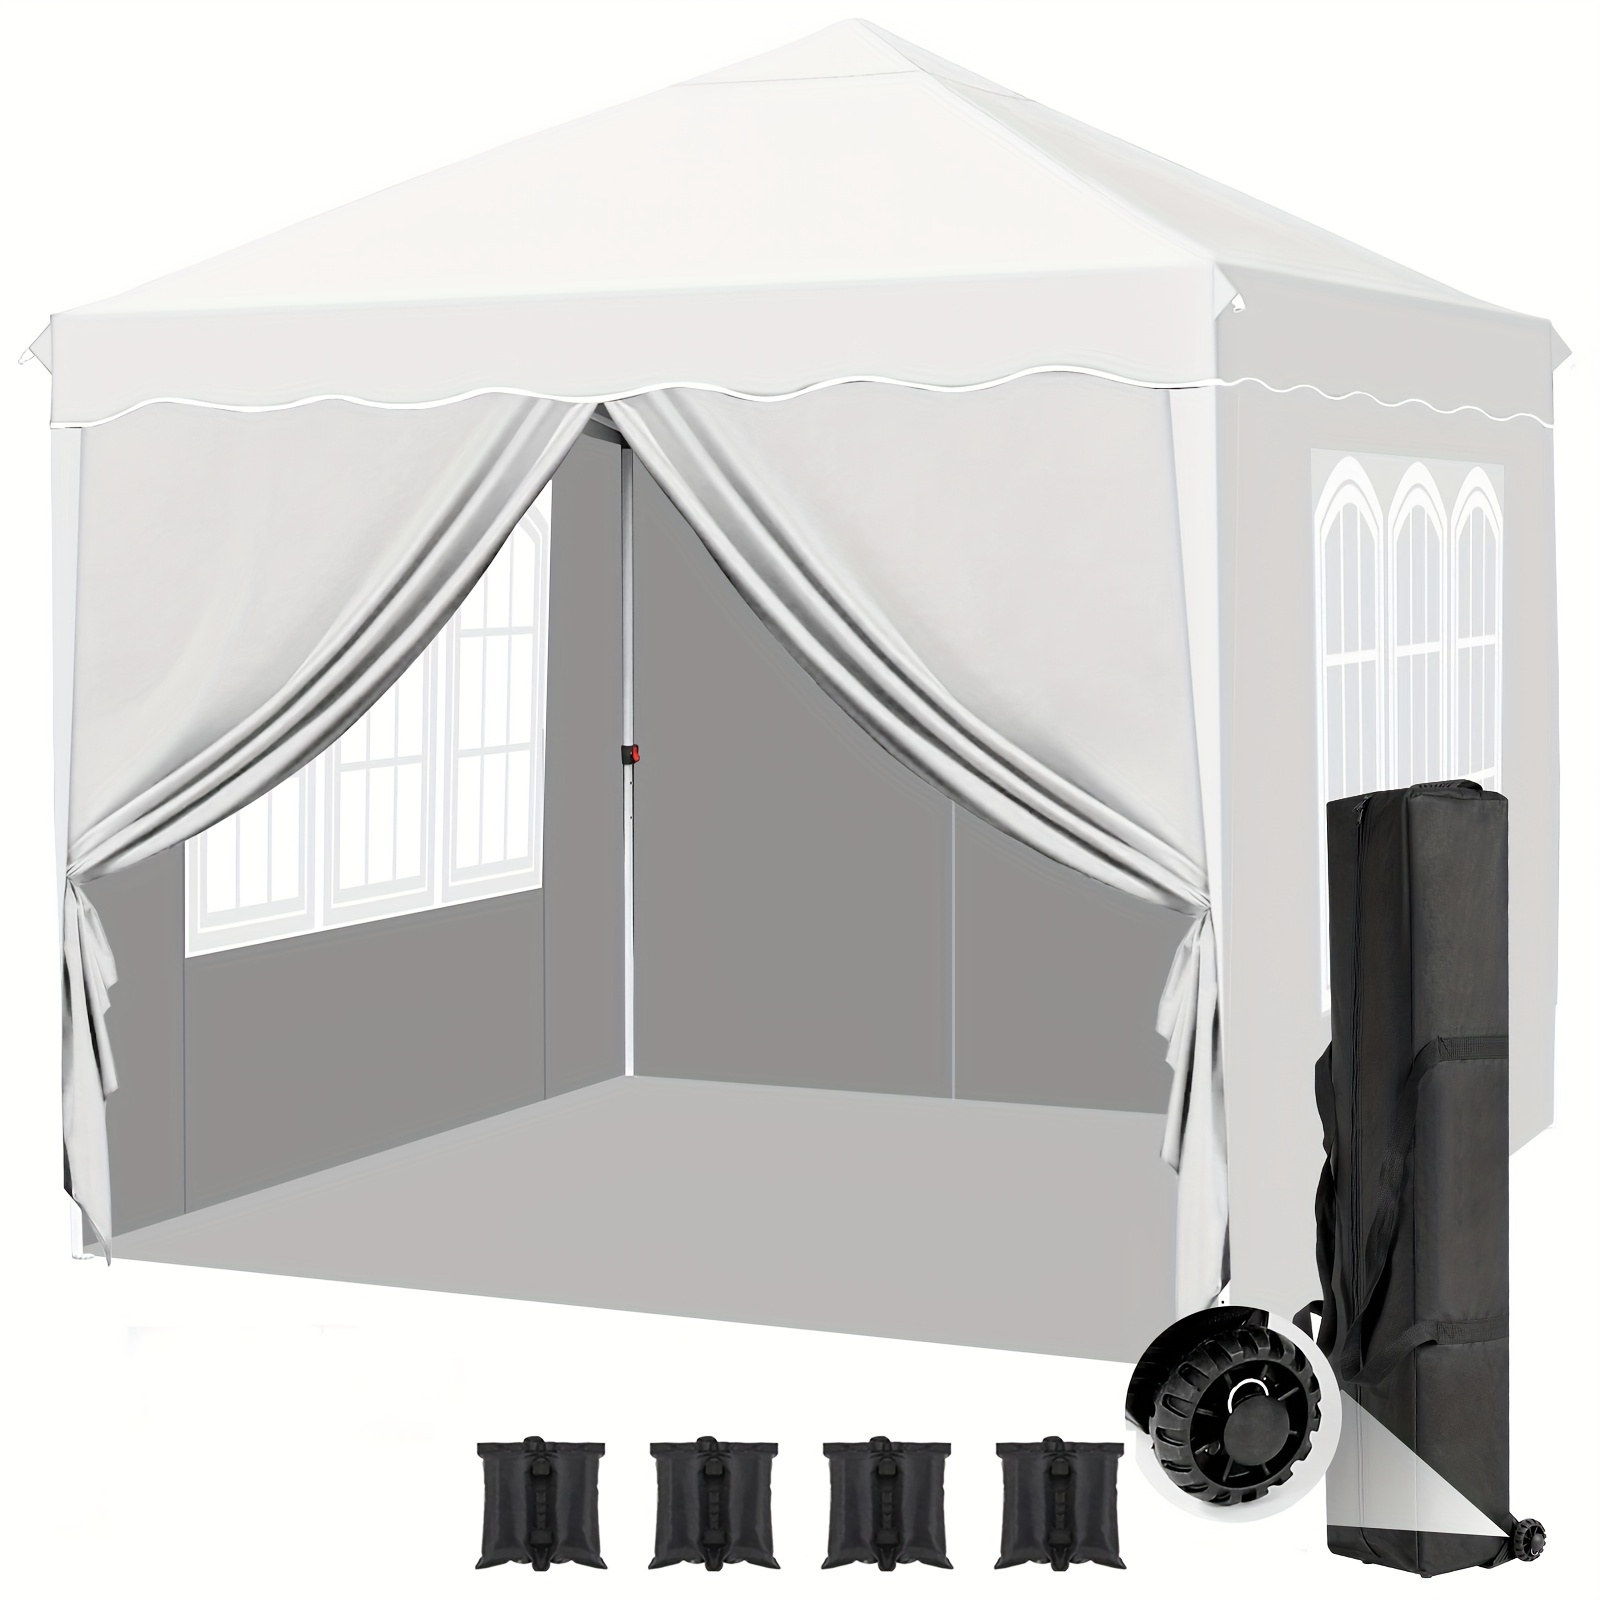 

Pop Up Commercial Instant Canopy Tent, 10x10 Outdoor Fully Waterproof With 4 Removable Sidewall, Heavy Duty Party Events Camping Beach Canopies, Upgraded Removable Wheel Bag